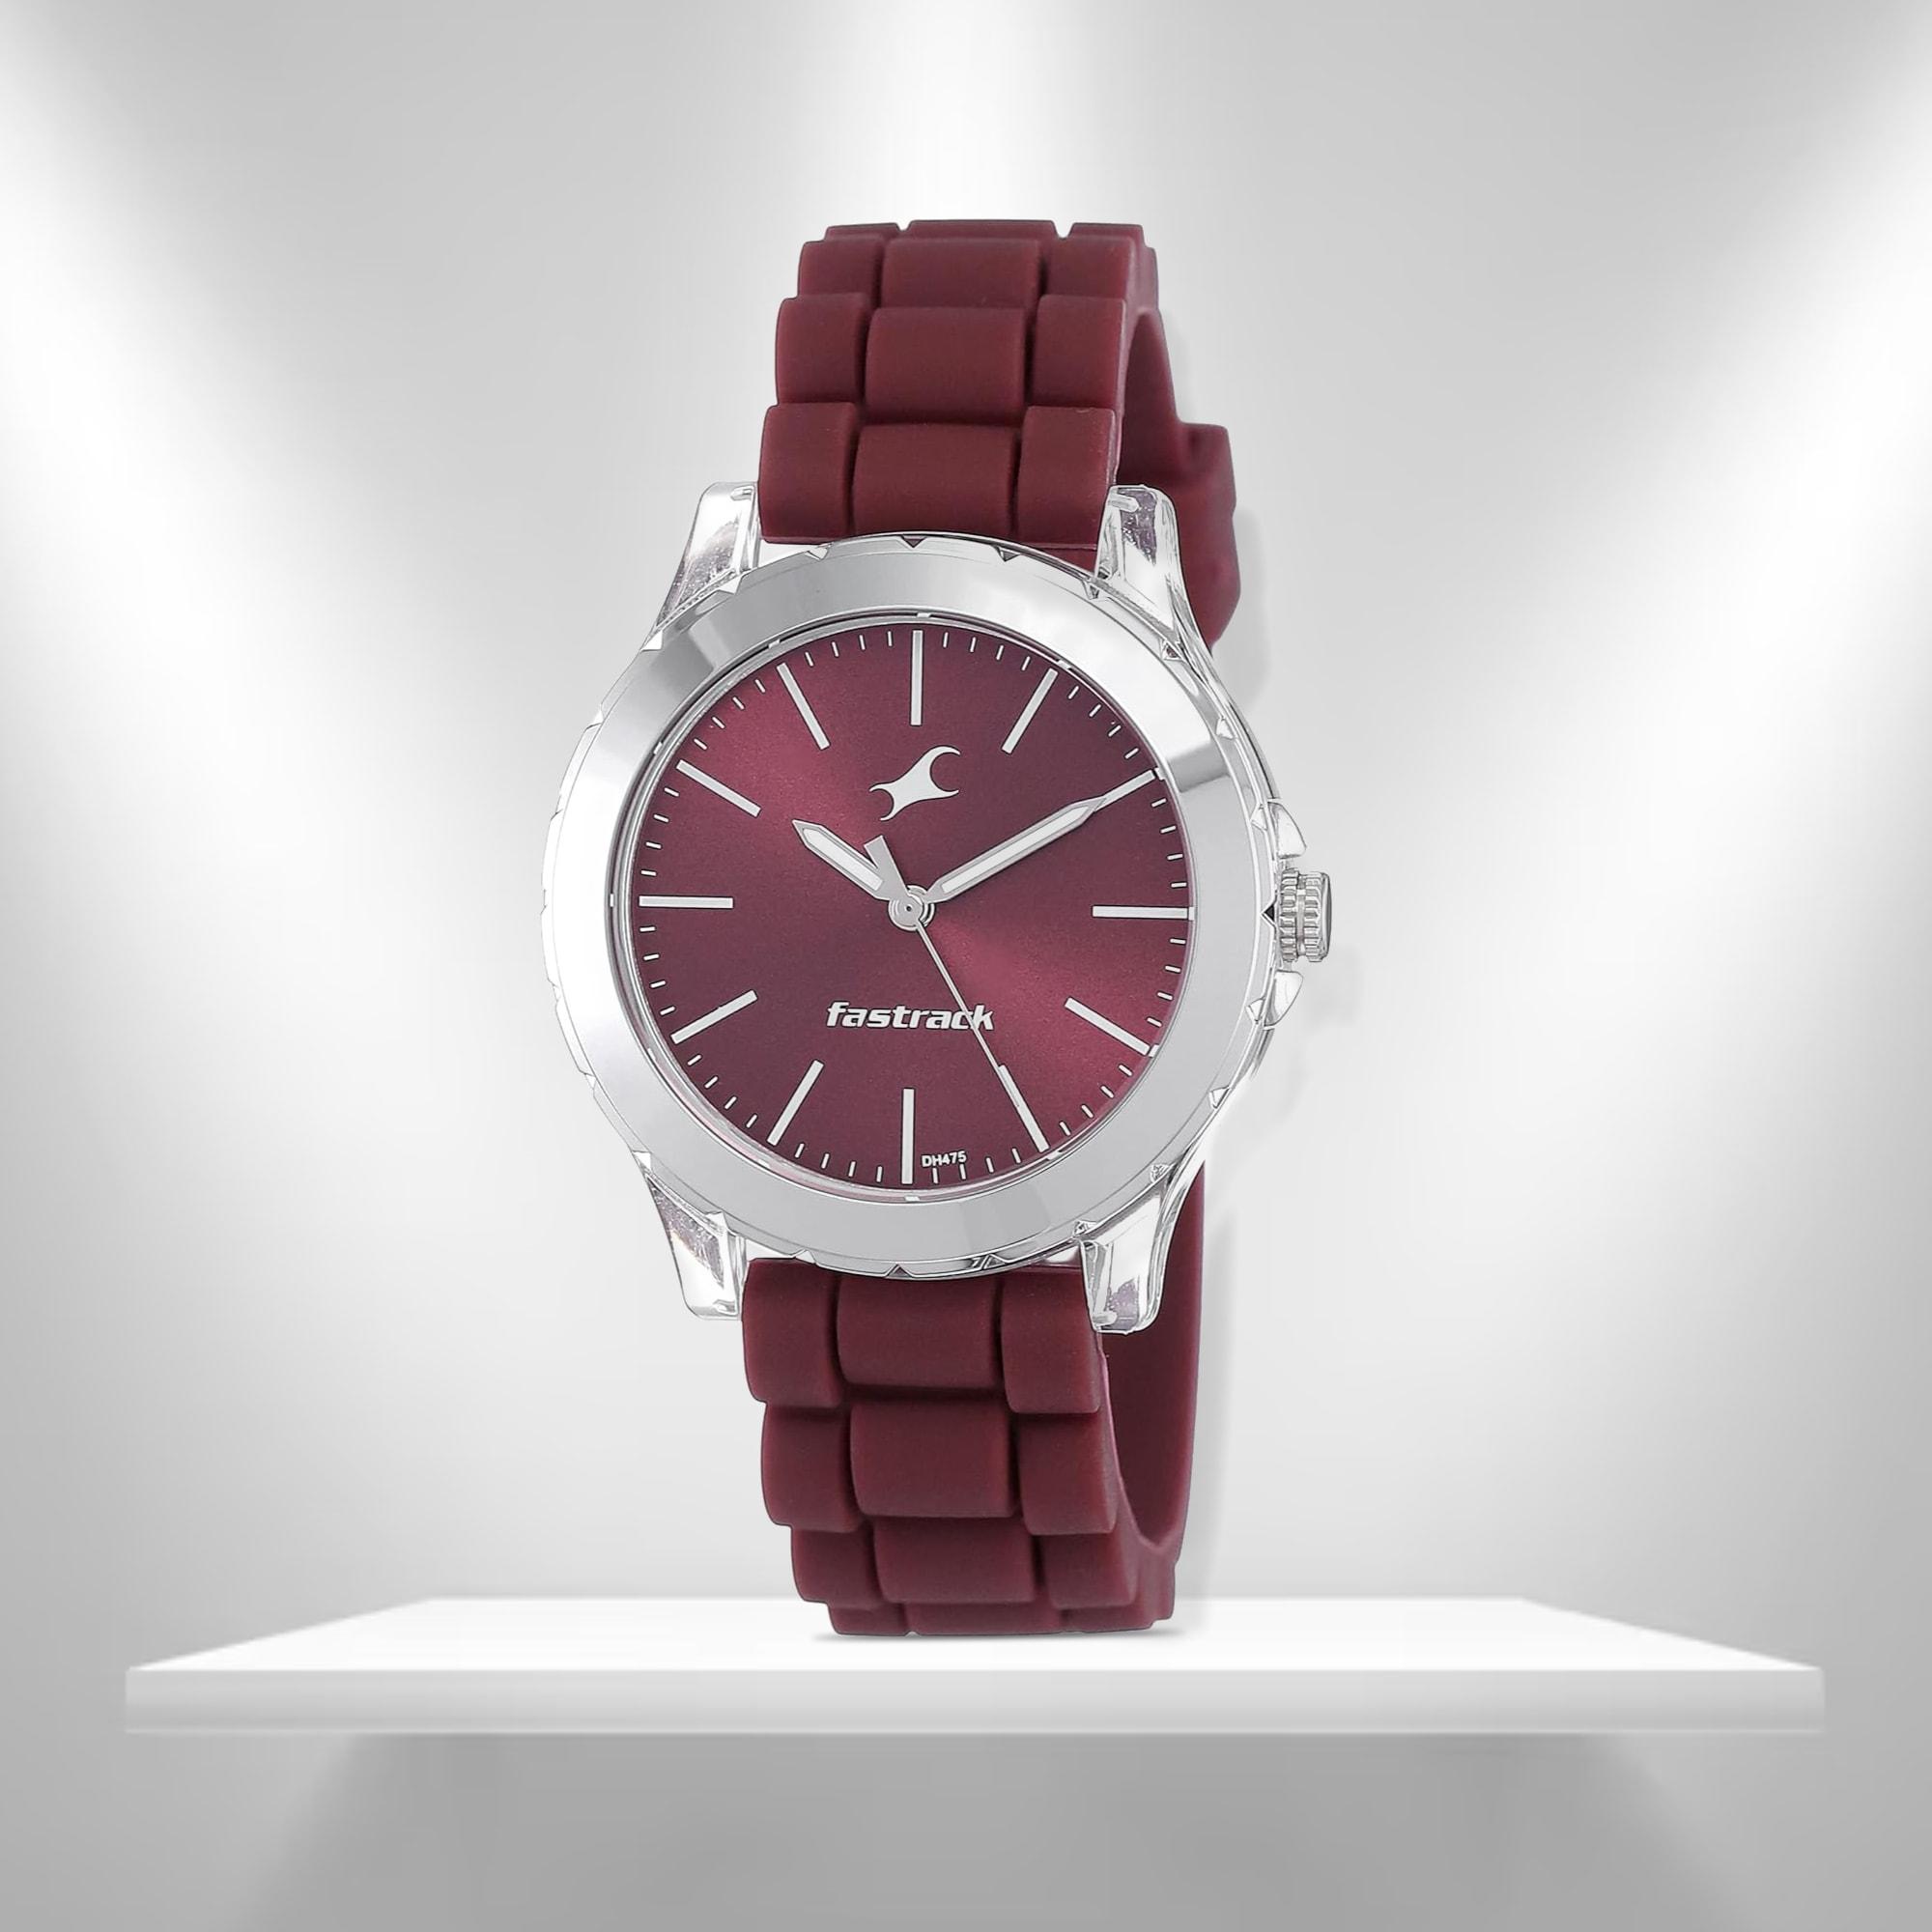 New Launch: The All-New Rado Captain Cook Bronze Burgundy - Kapoor Watch  Co. | Blogs